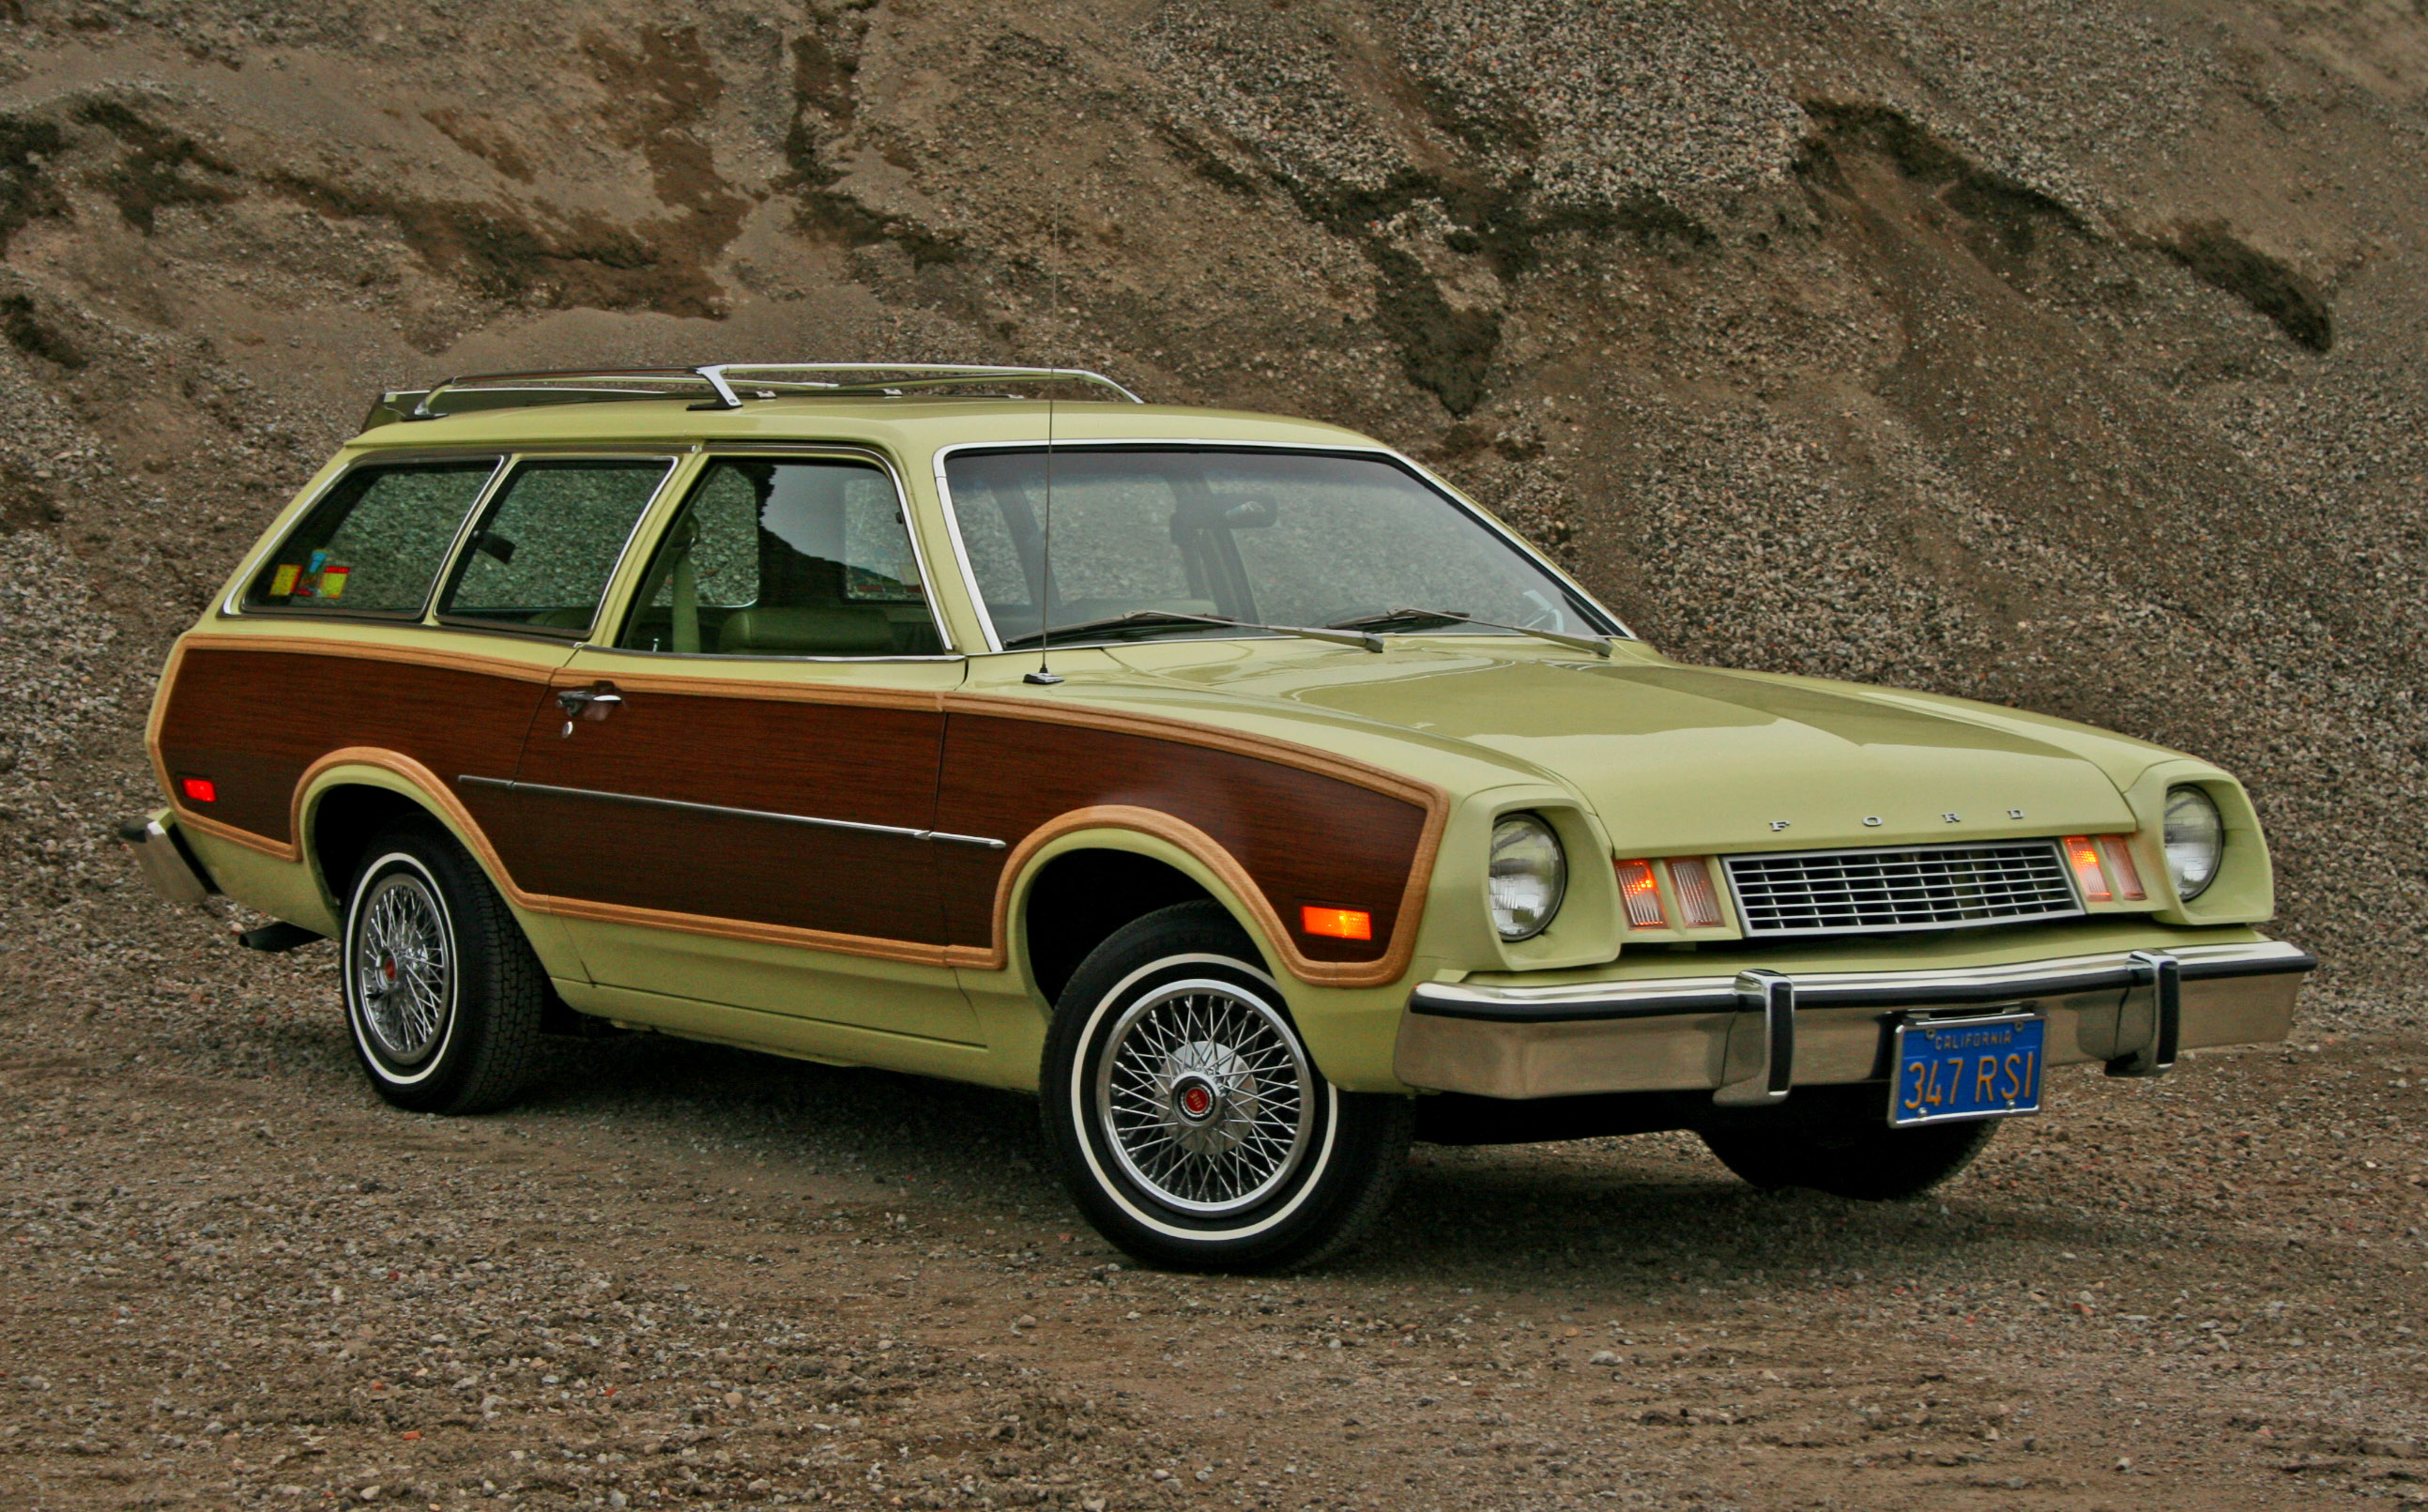 Ford Pinto Wagon Backgrounds, Compatible - PC, Mobile, Gadgets| 2587x1611 px